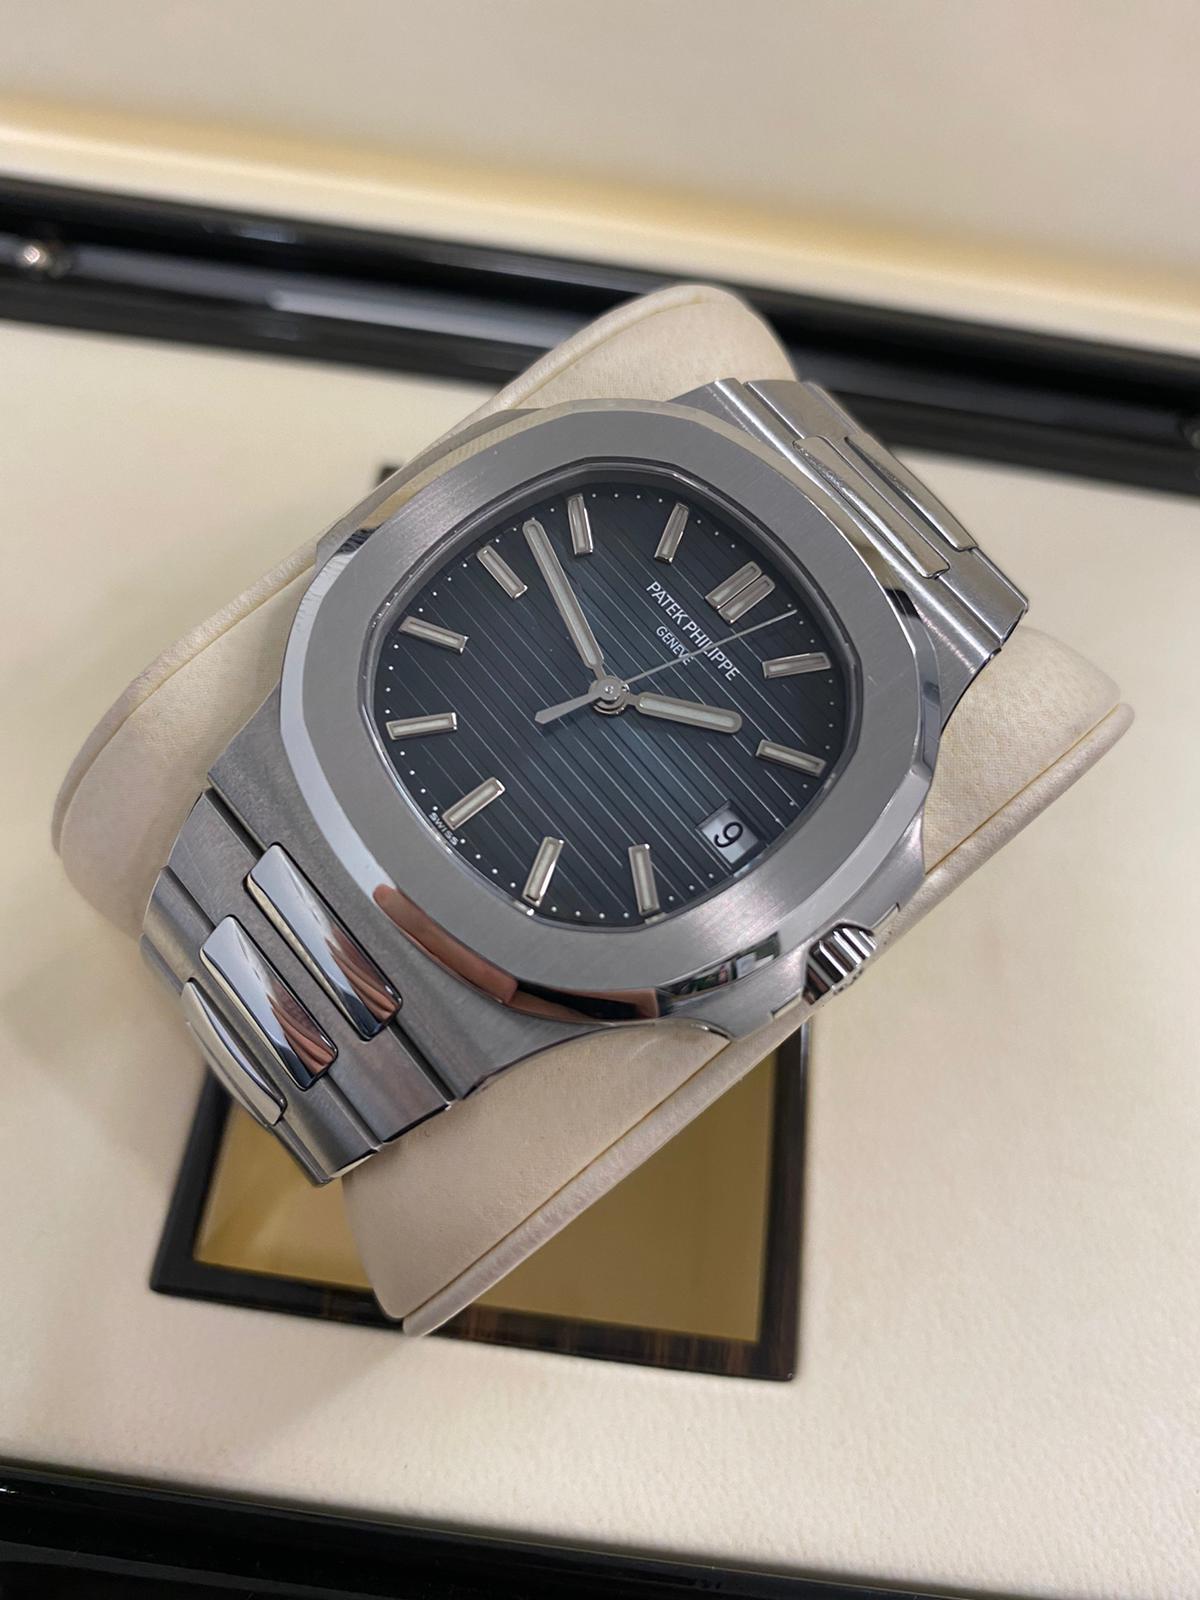 Description
Brand: Patek Philippe
Model: Nautilus
Reference: 5711/1A-010
Year: 2016
Material: Steel
Dial Color: Blue
Dimensions: 40mm
Watch Movement: Self-Winding
Bracelet/Strap: Stainless Steel Bracelet
Box/Paper: B+P
Condition: Mint
Once an order